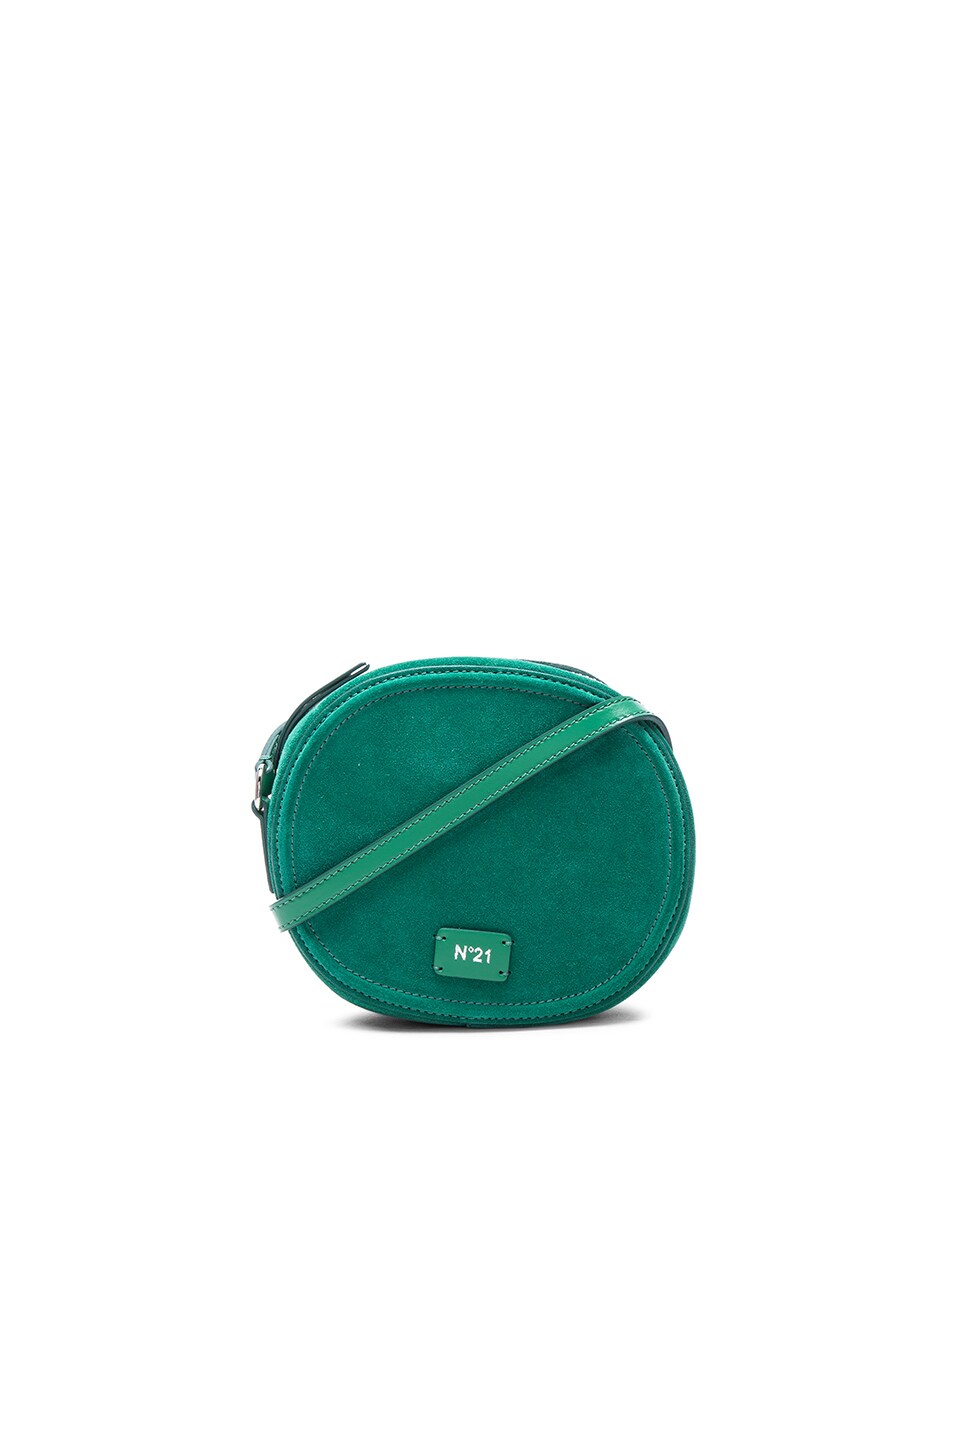 Image 1 of No. 21 Small Round Crossbody Bag in Emerald